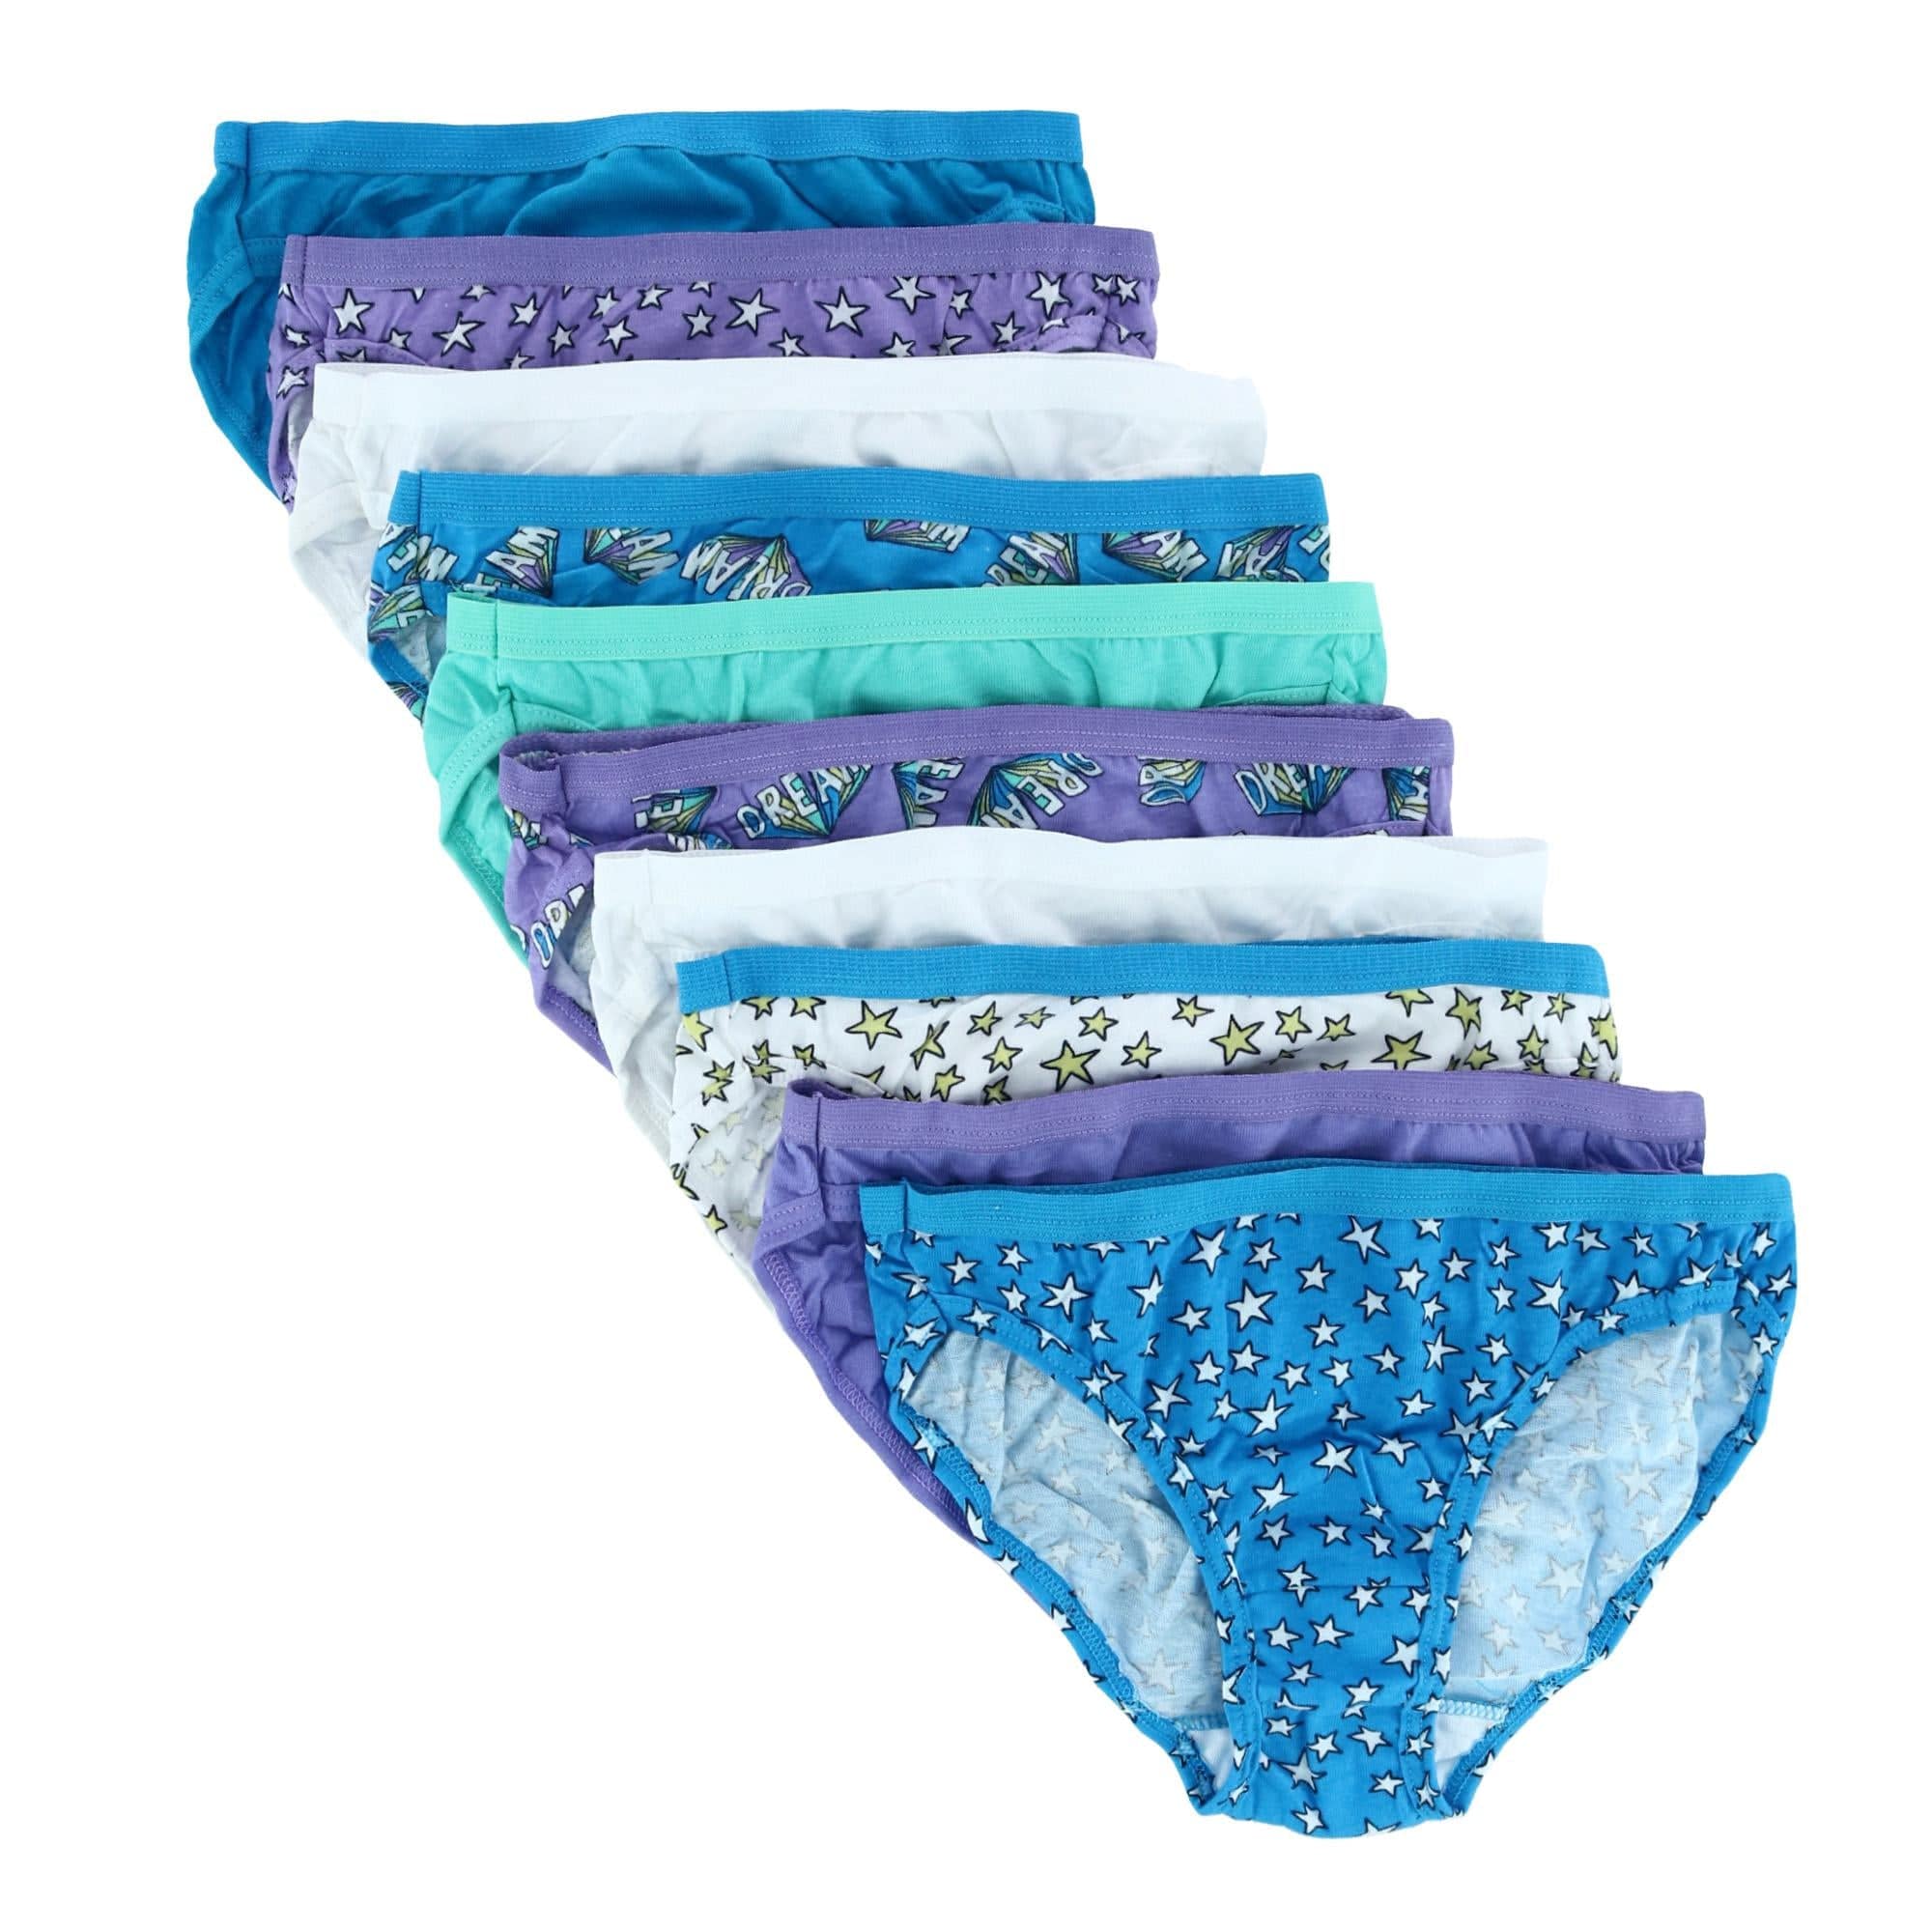 Girl's Assorted Cotton Bikini Underwear (10 Pack) by Fruit of the